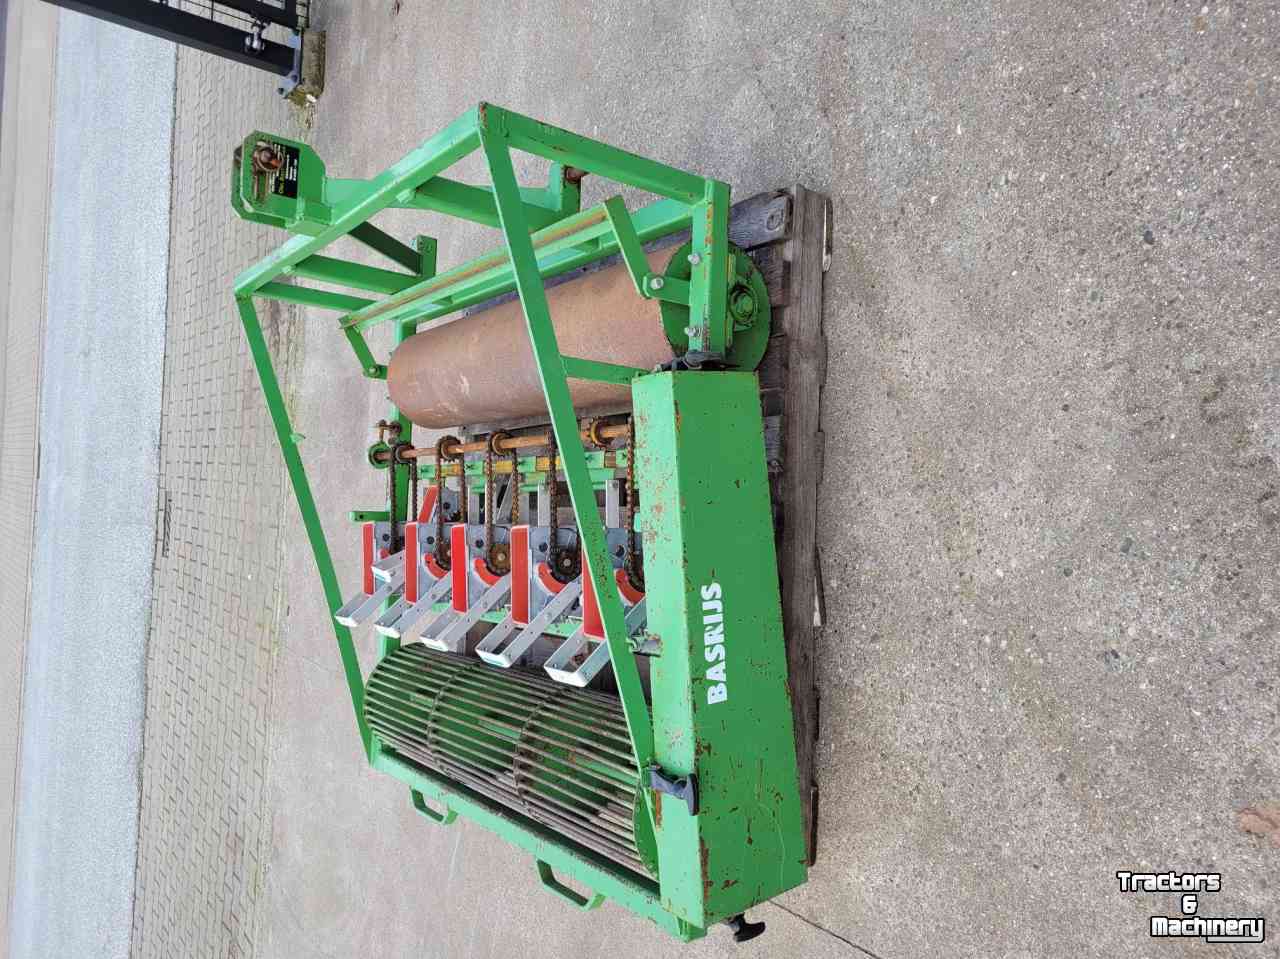 Vegetable- / Precision-seed drill Earthway 6 rij earthway zaaimachine in frame